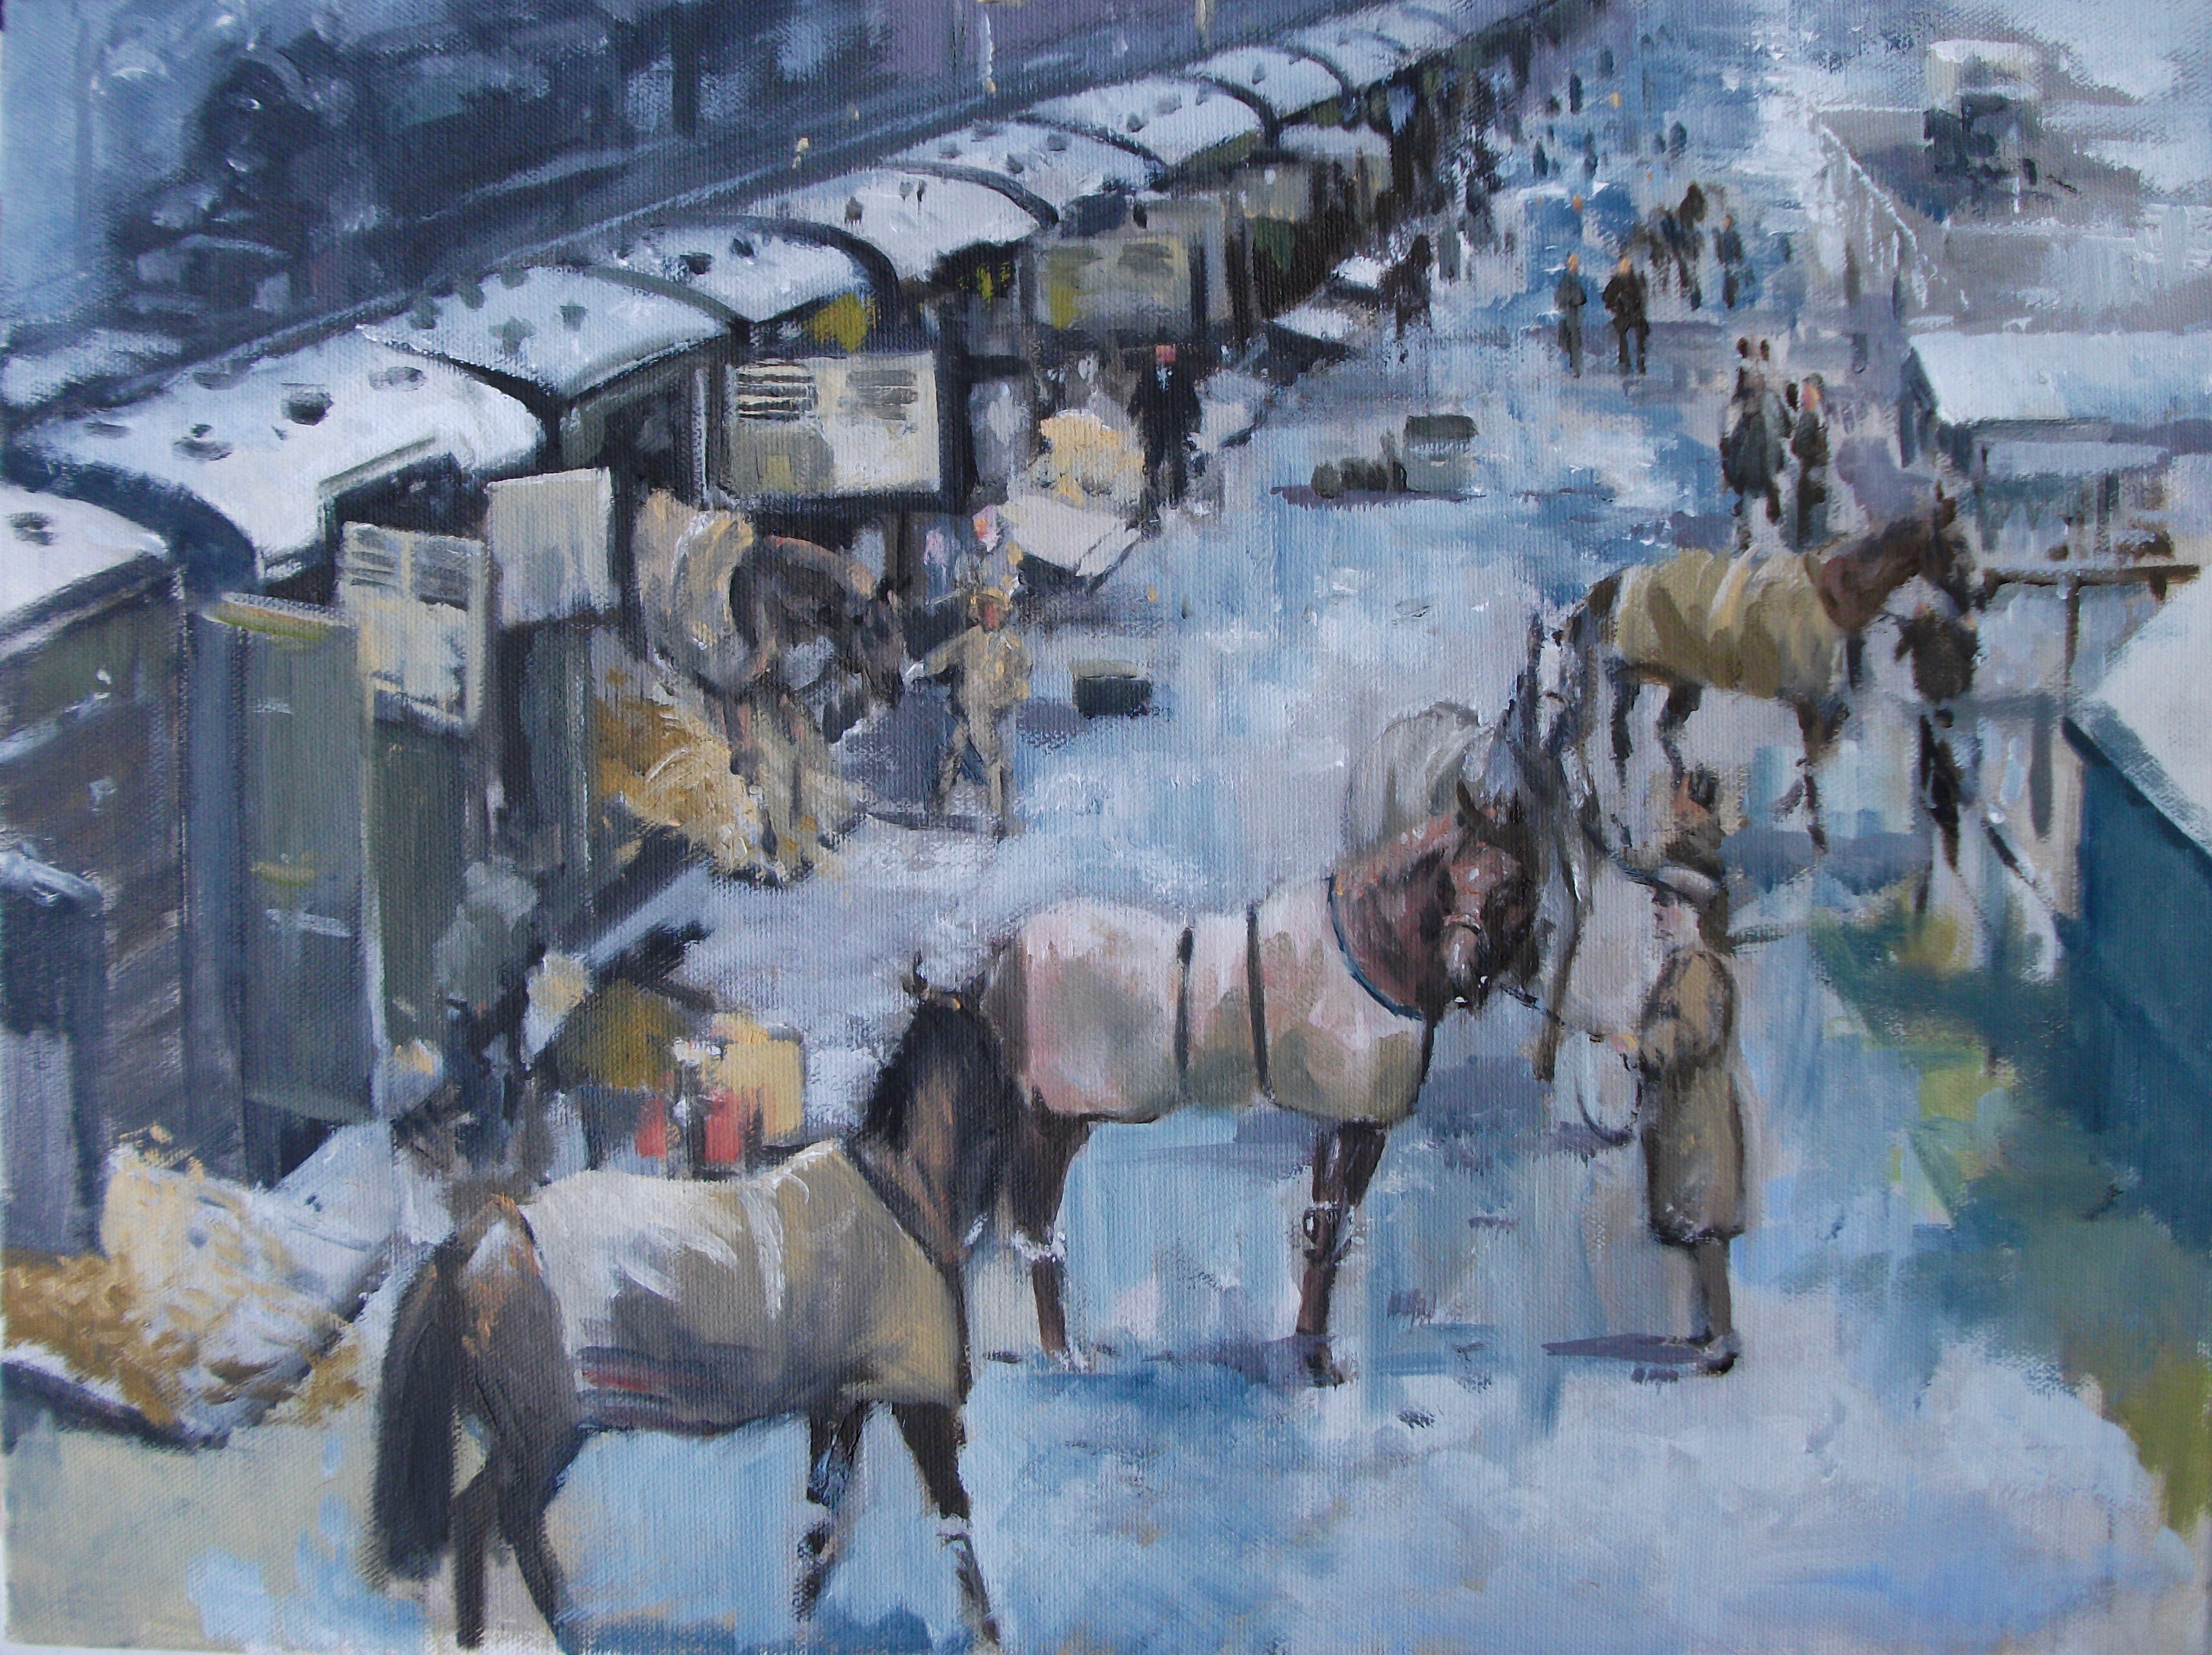 "Arriving at Ascot" by David 'Mouse' Cooper.